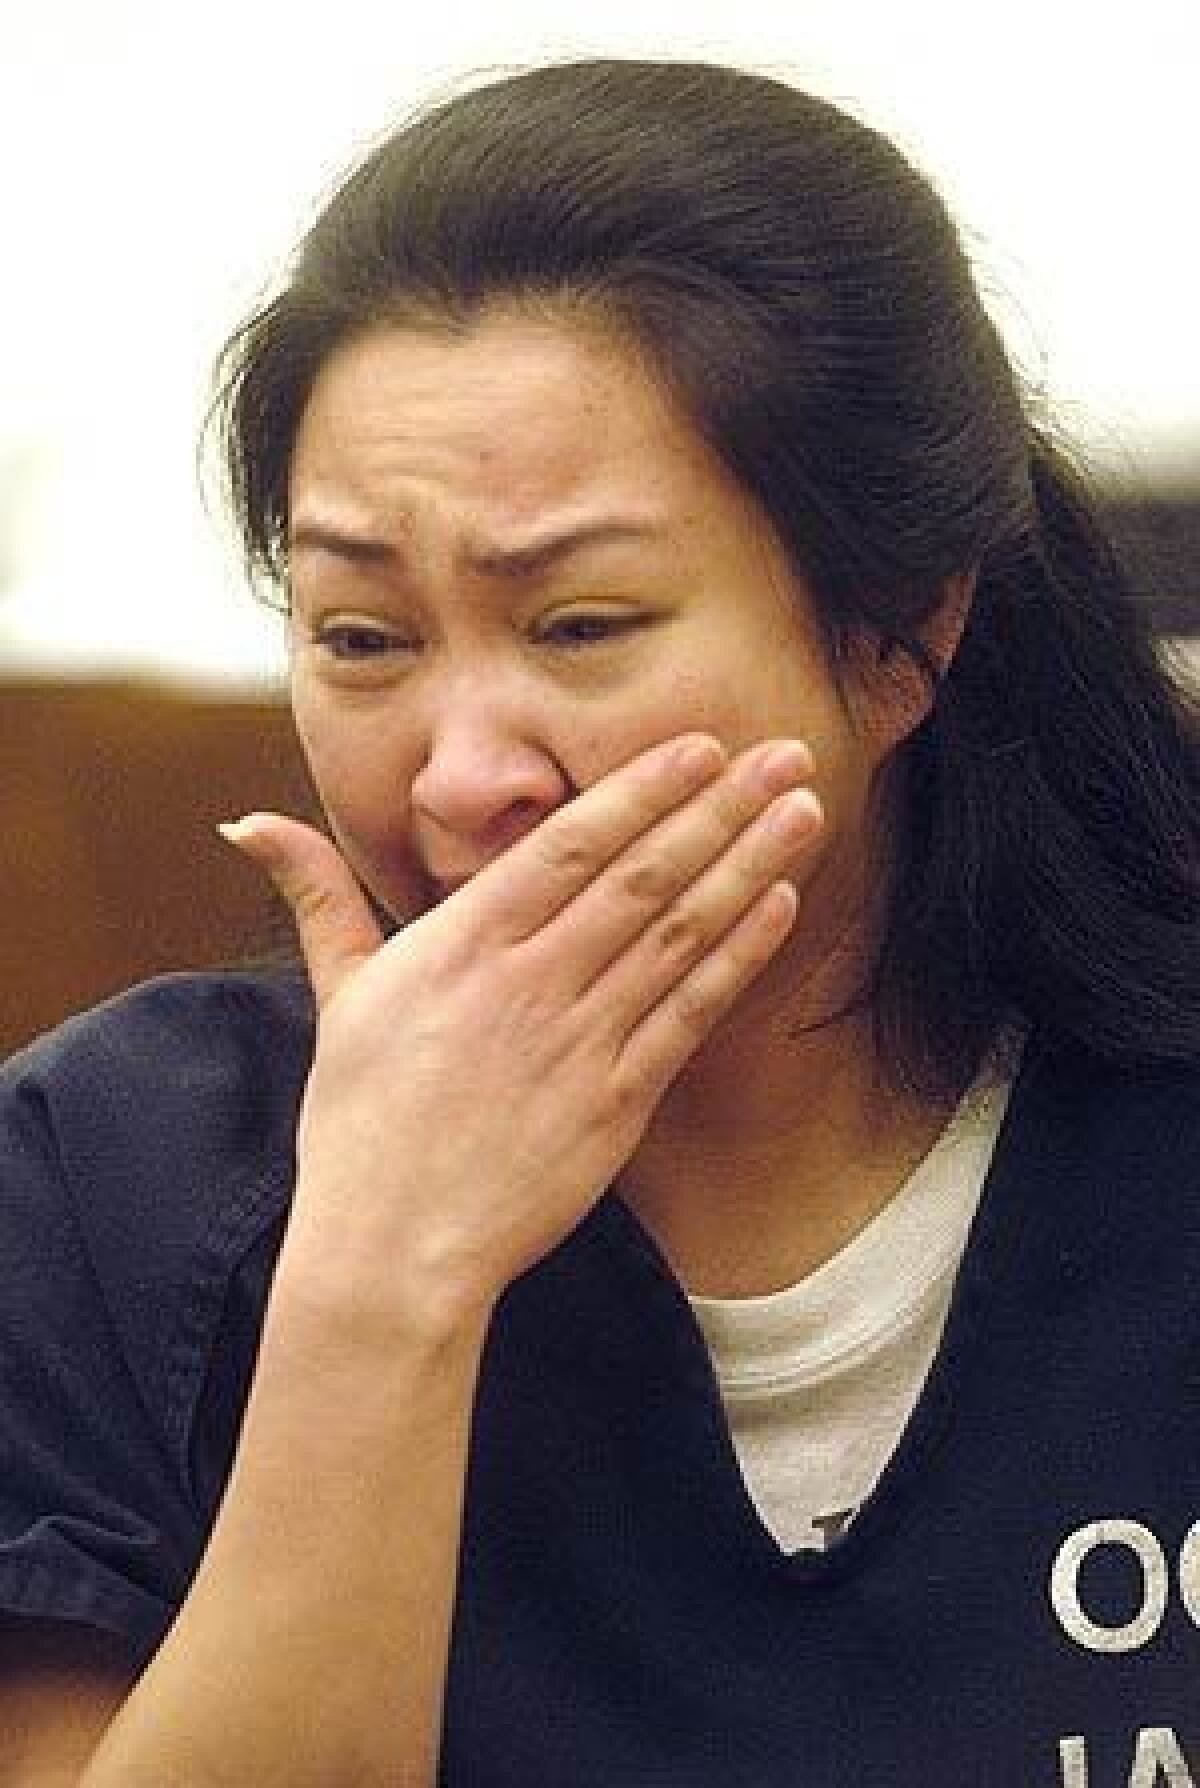 Sheila Marie Sikat gets emotional while addressing the court during her sentencing hearing, which was continued until March 6, 2008.